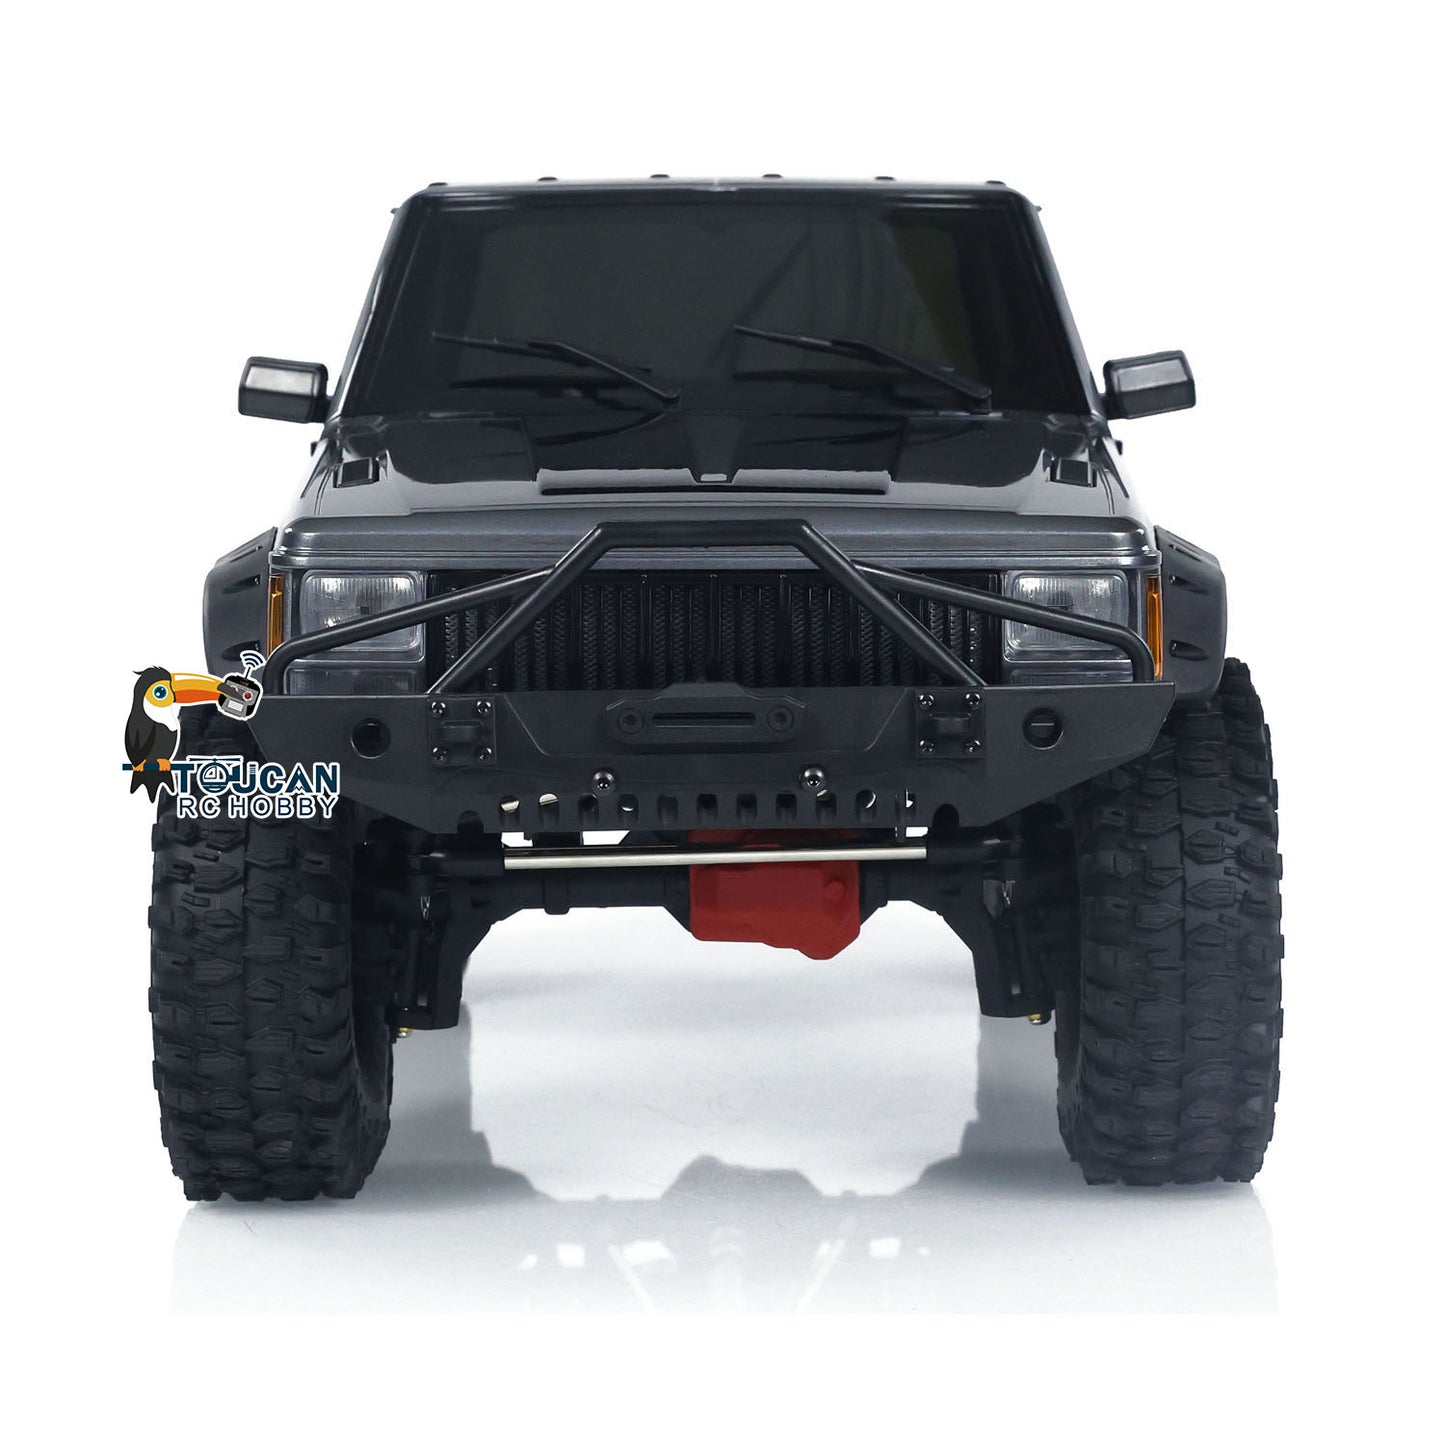 1/10 RC Off-road Crawler 4WD Remote Controlled Truck Car Model Simulation Differential Lock Lights Sounds Radio LED